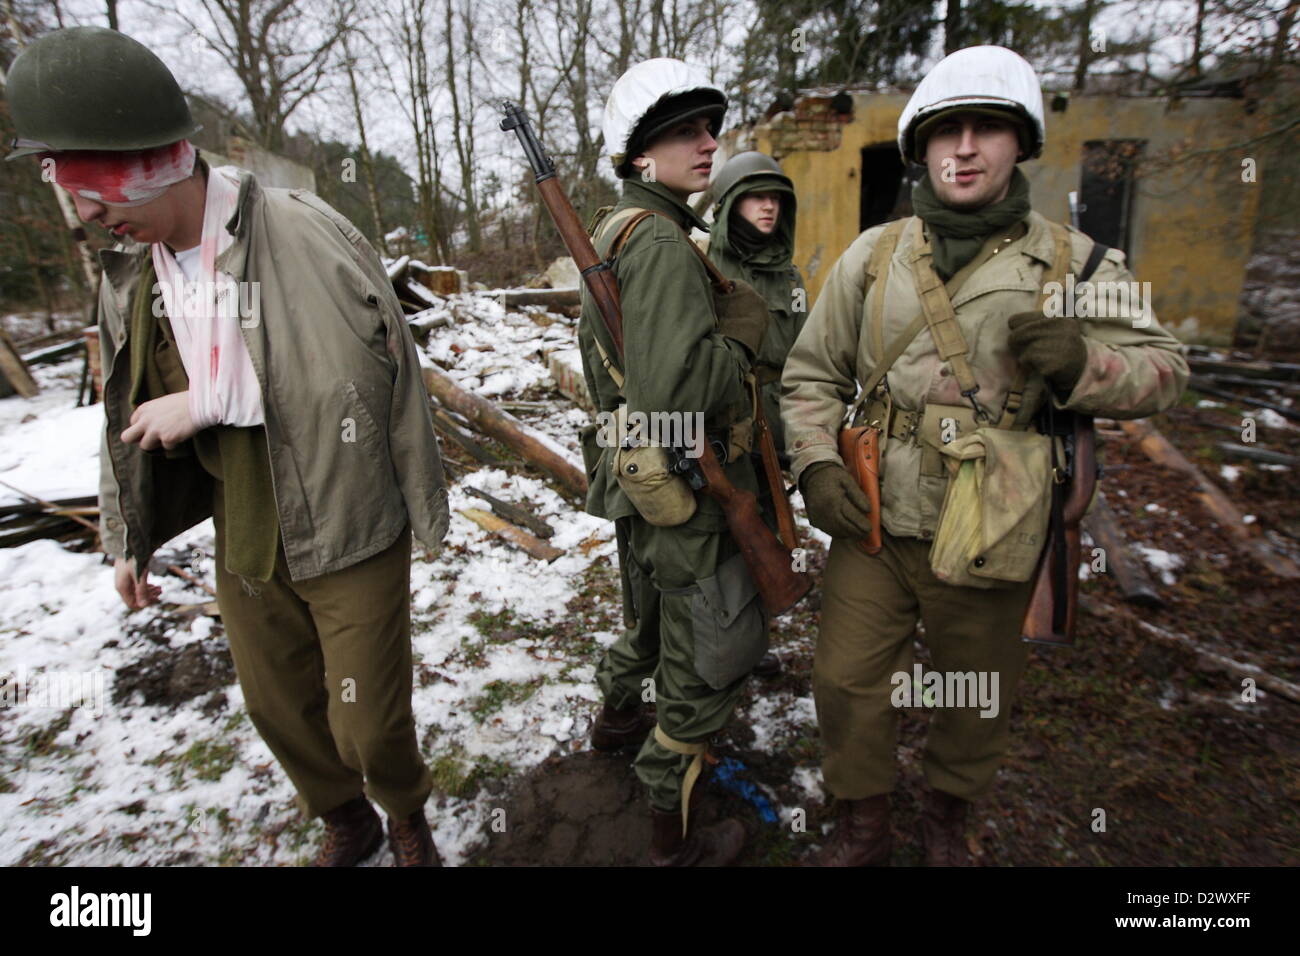 American Soldiers In Wwii Reenactment High Resolution Stock Photography And Images Alamy - roblox ww2 american uniform